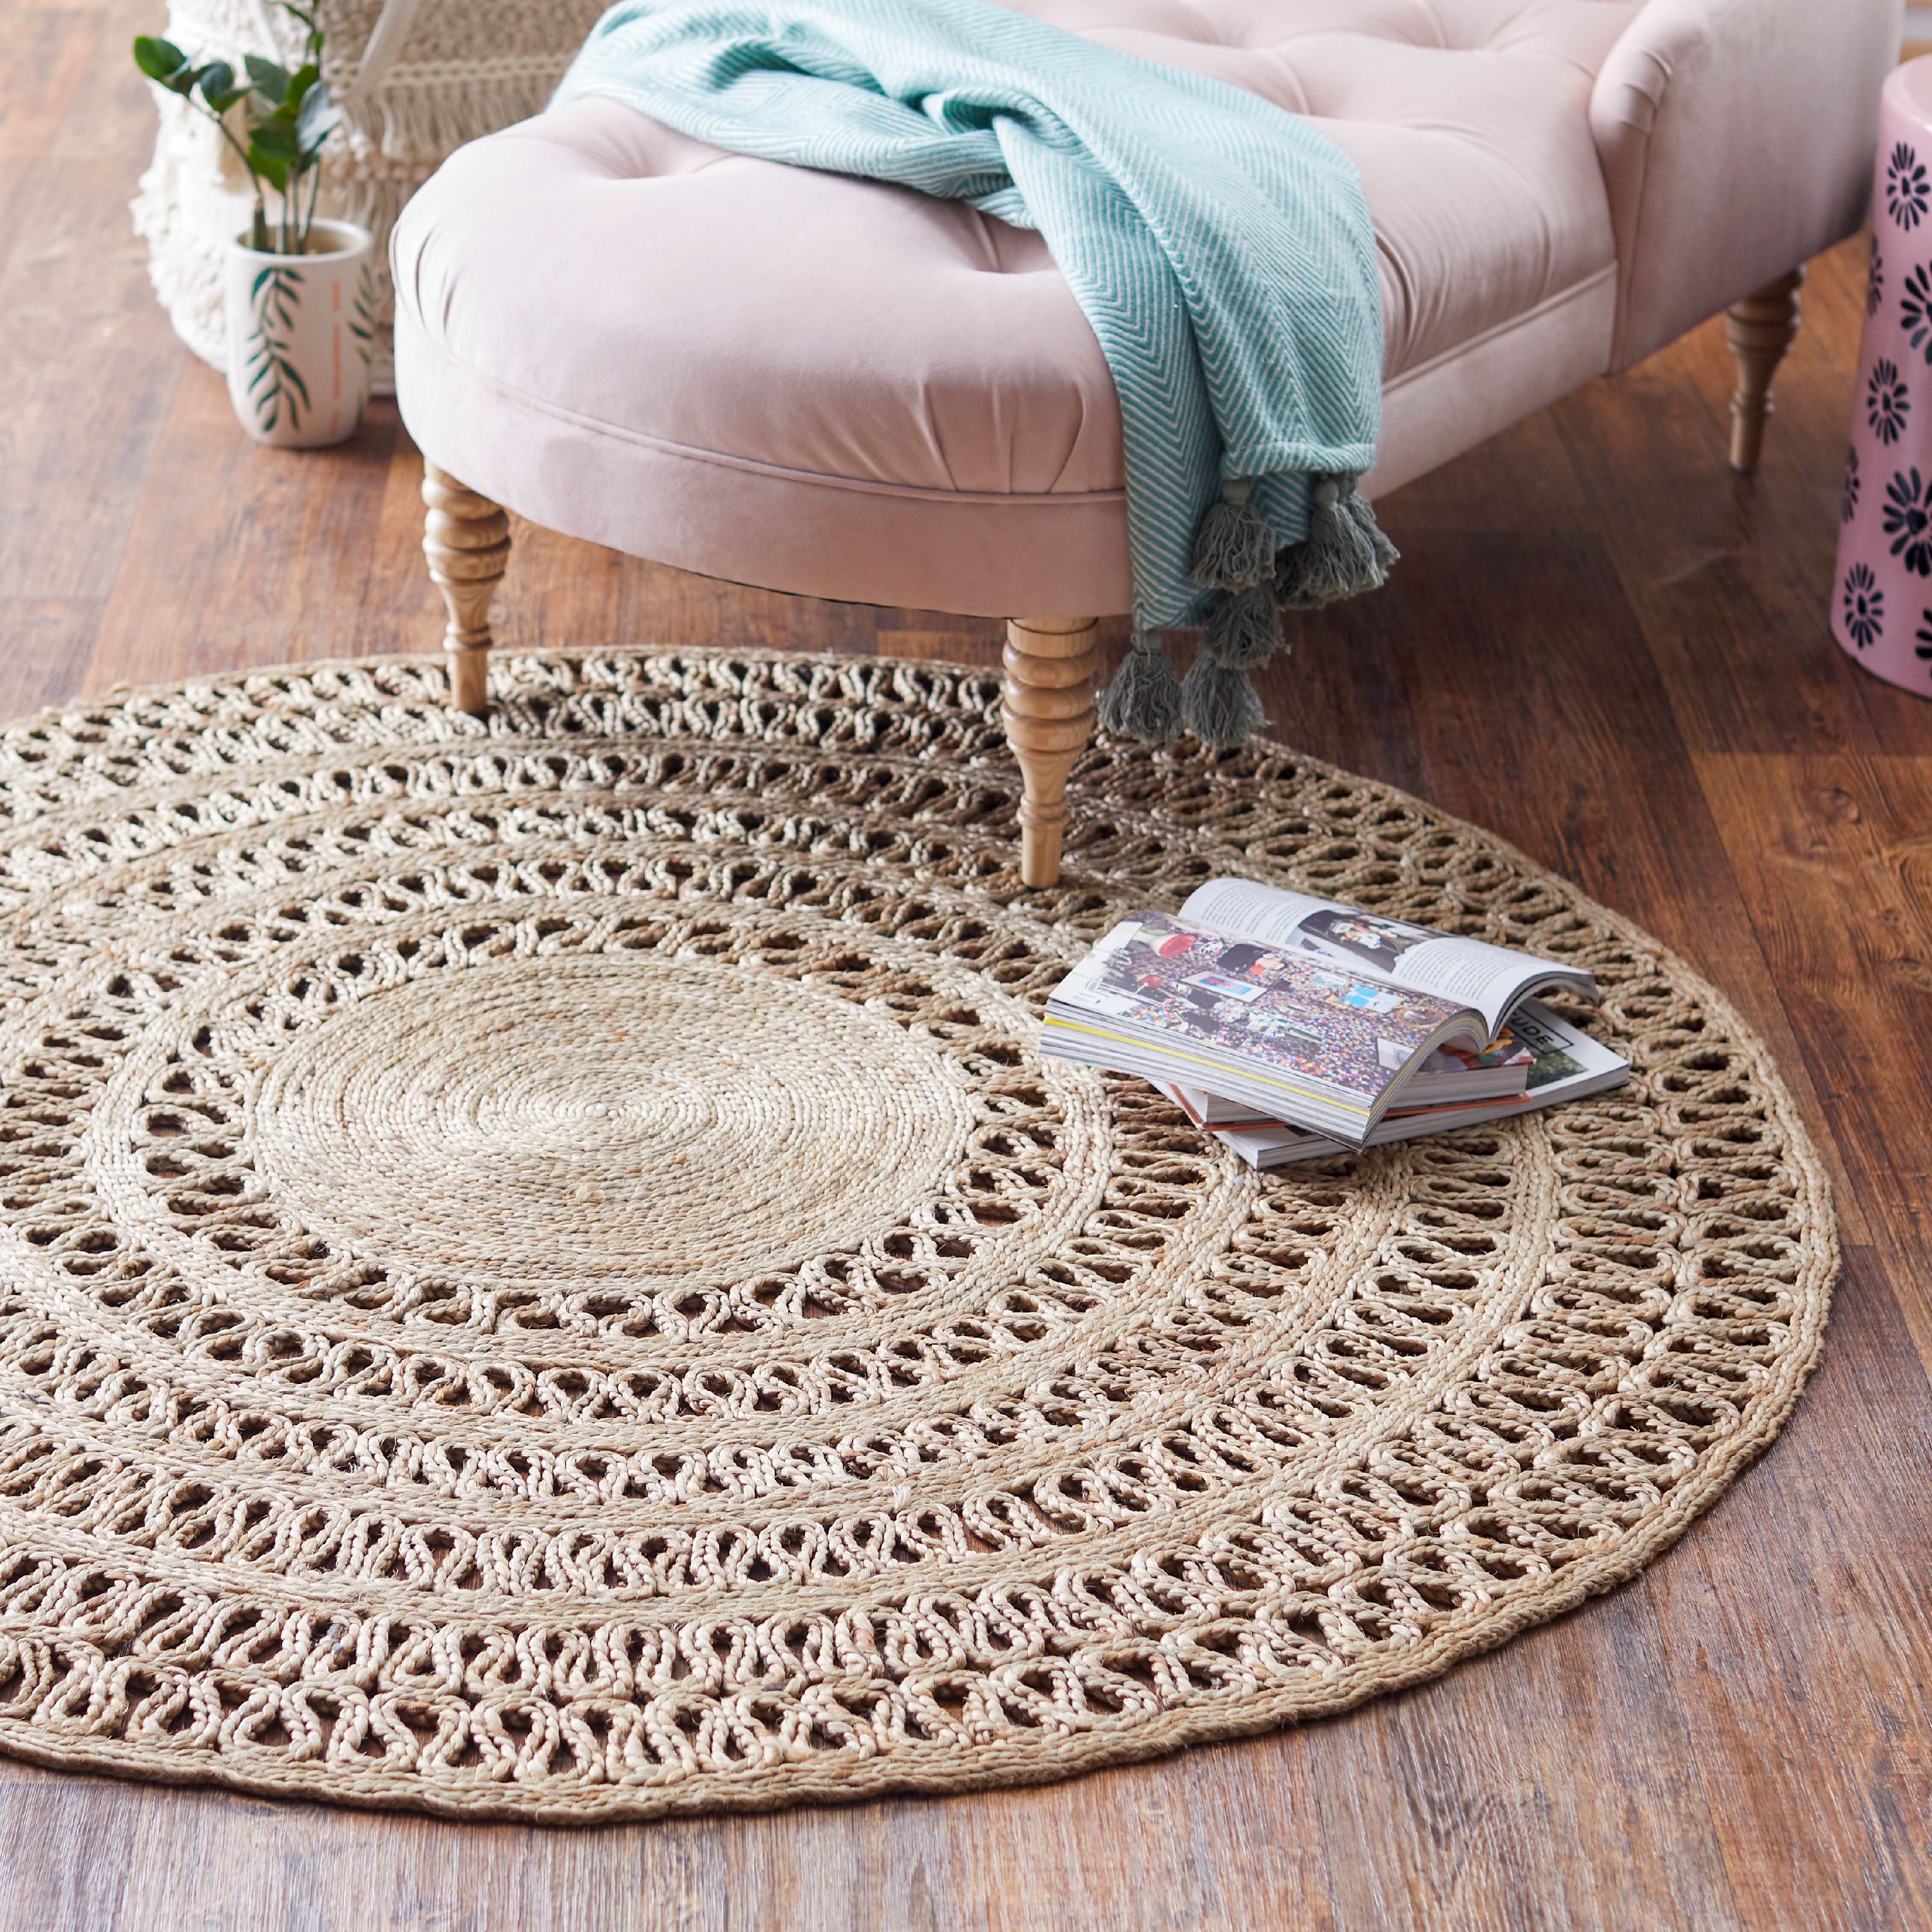 Round Jute Area Rug by Drew Barrymore Flower Home - image 5 of 5